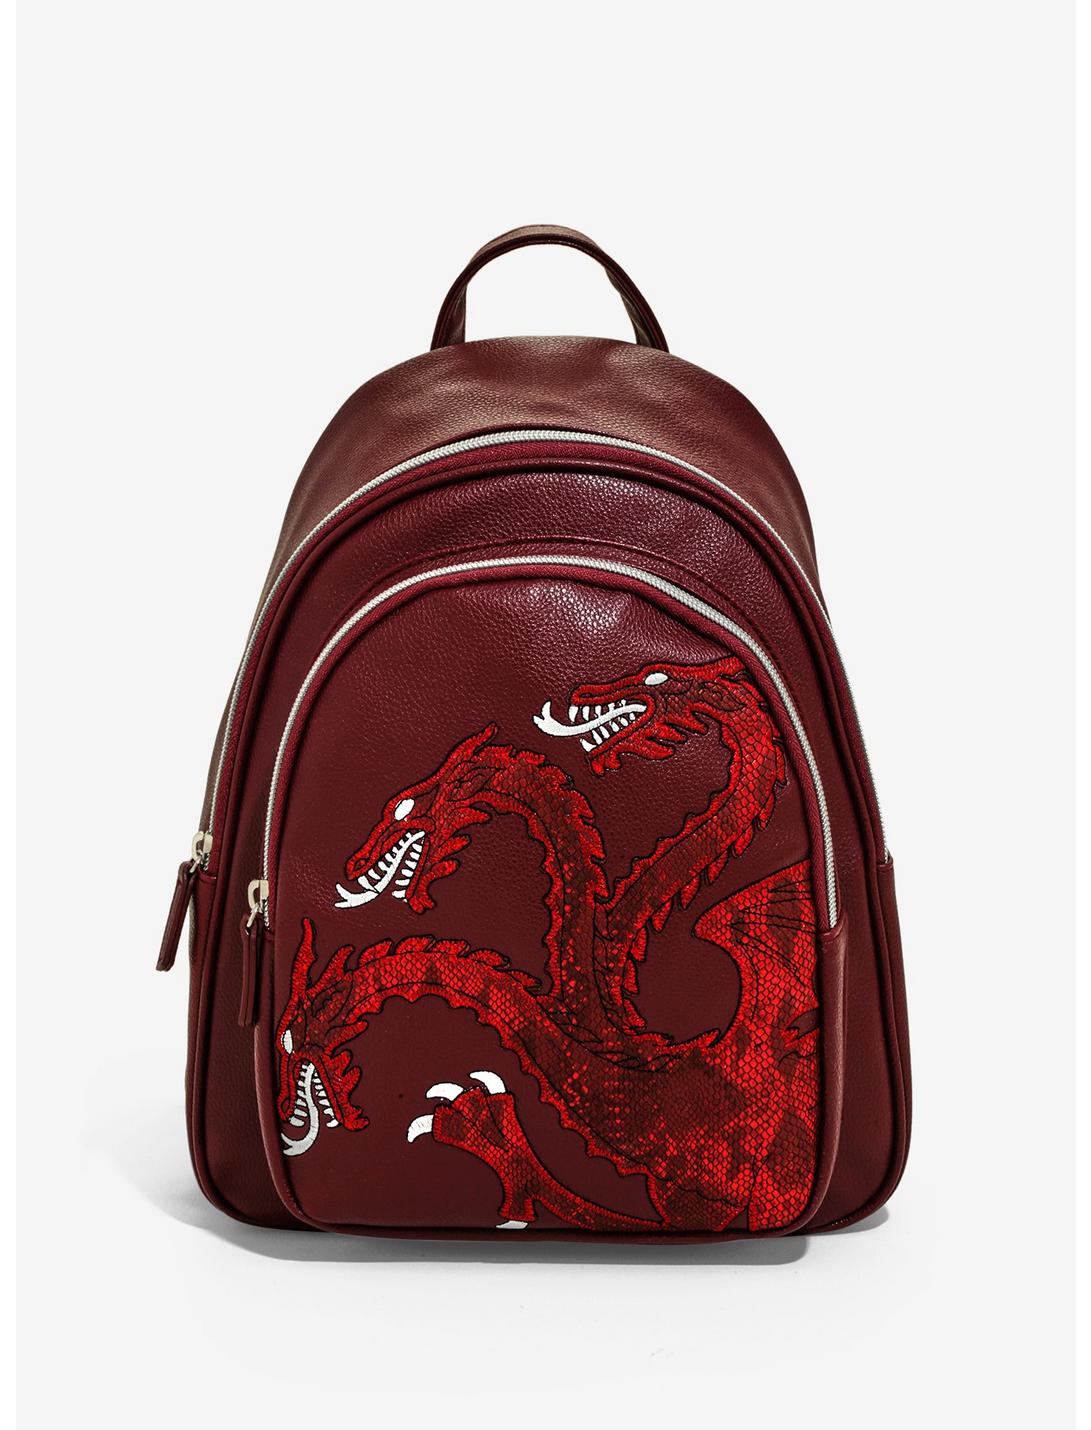 Plus Size Danielle Nicole Game Of Thrones House Targaryen Mini Backpack - BoxLunch Exclusive, , hi-res